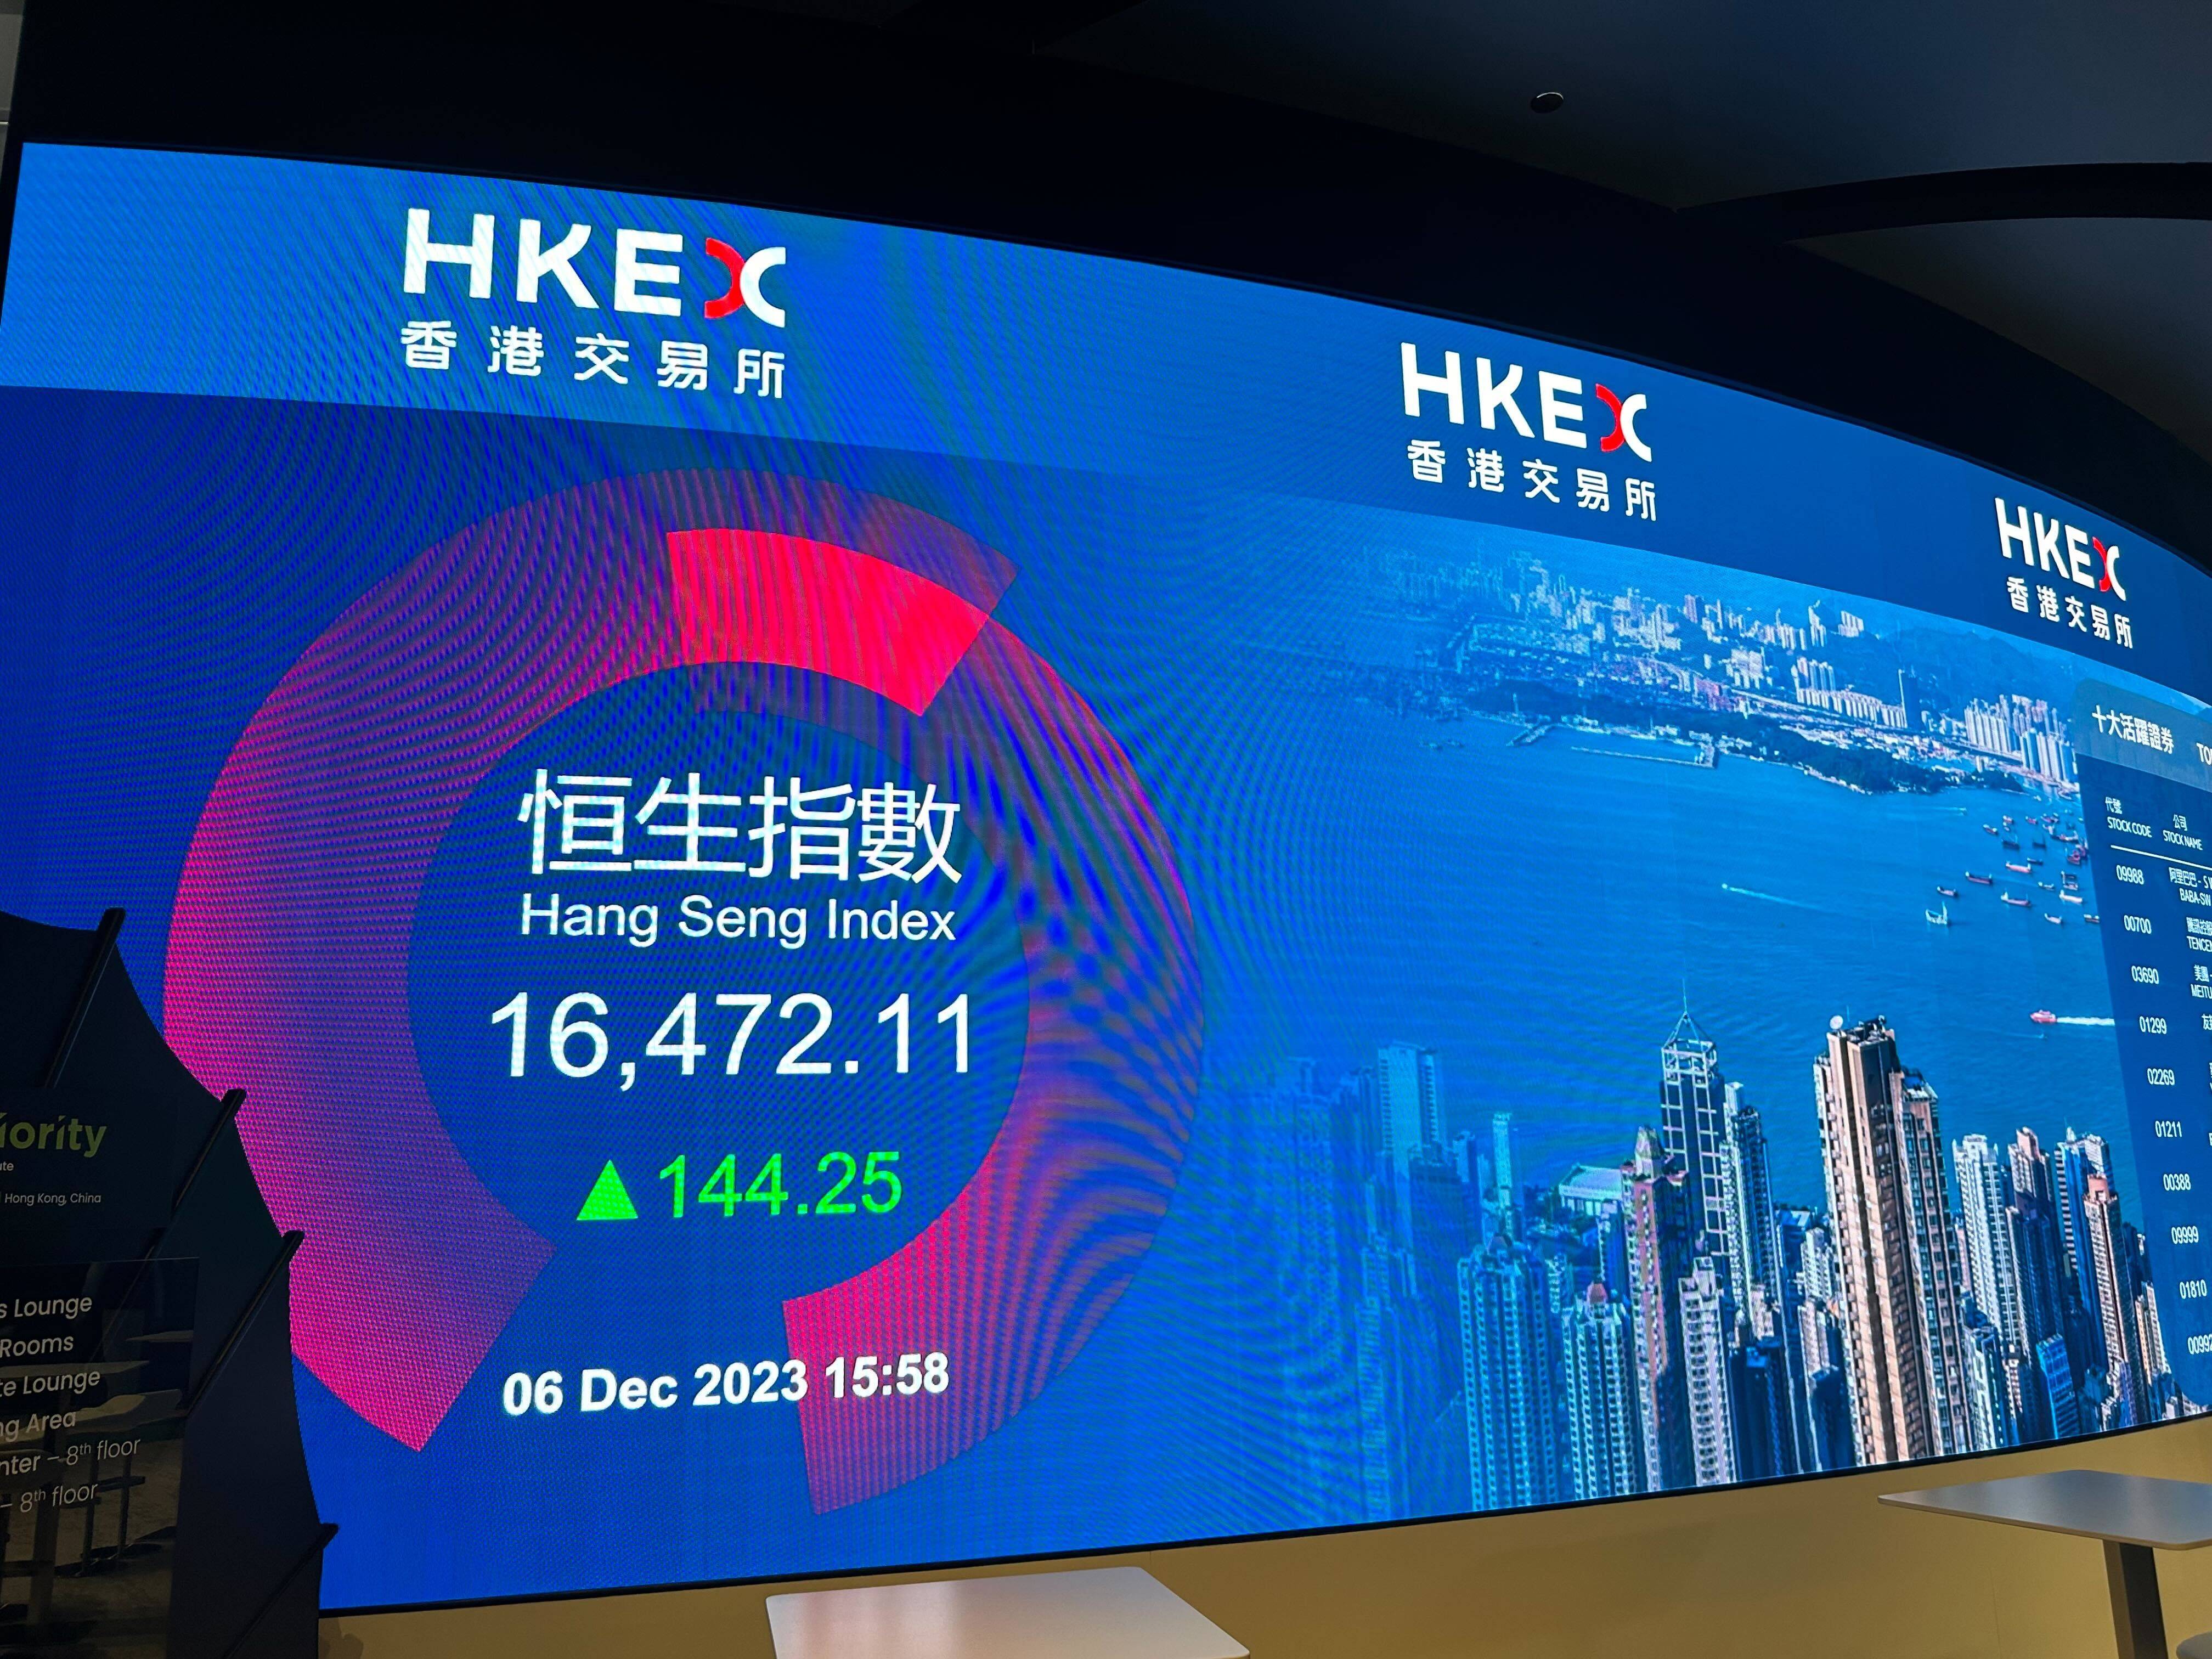 A screen in the Hong Kong stock exchange’s Connect Hall showing the Hang Seng Index level on December 6, 2023. Photo: Mia Castagnone